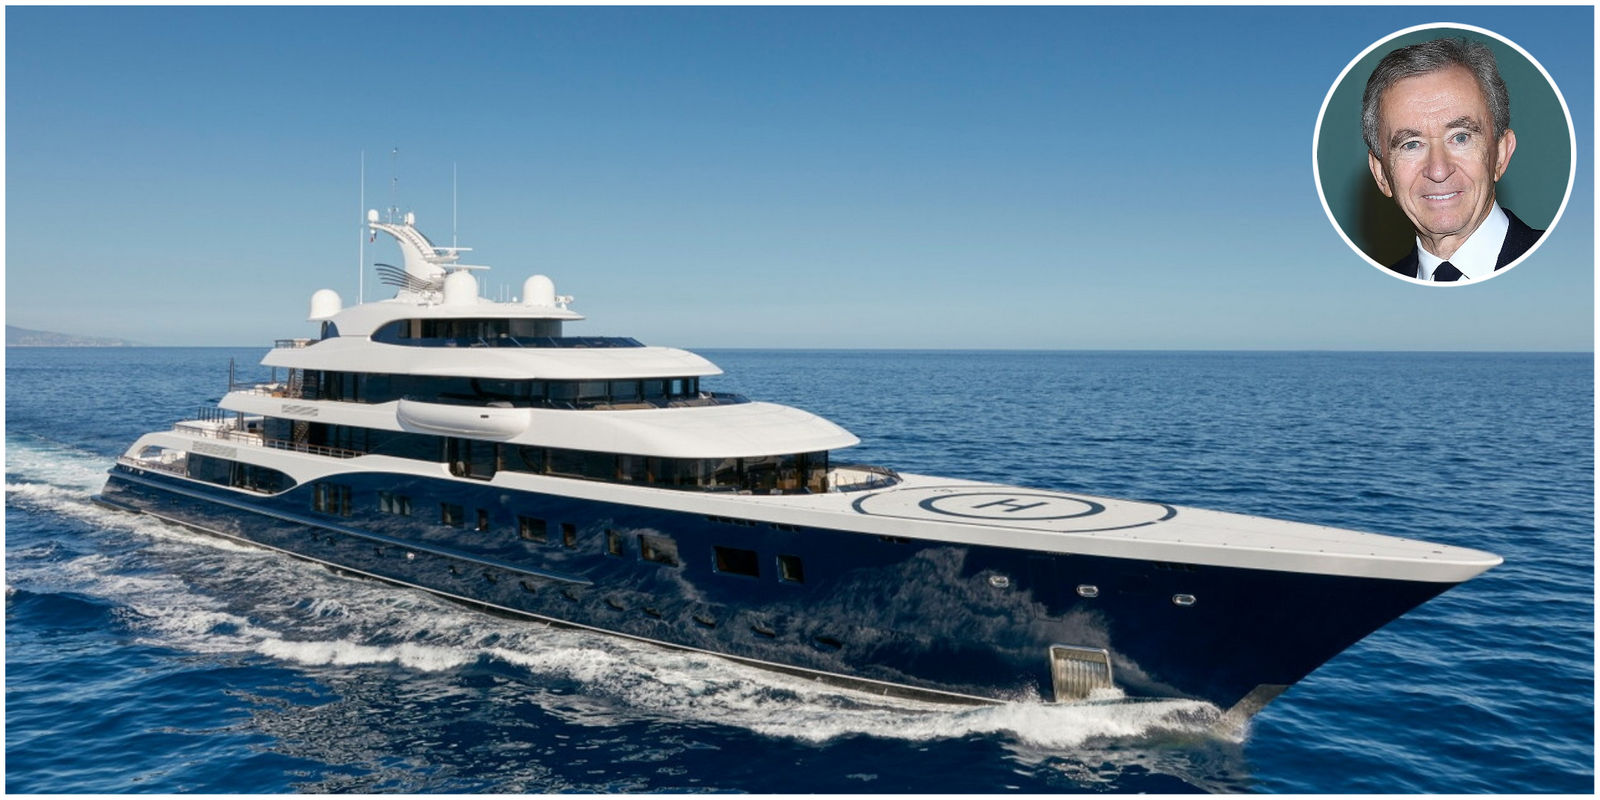 LVMH CEO Bernard Arnault's $150 million superyacht was denied docking and  banned entry into an Italian port - The centibillionaire's 333-feet long  yacht is too big for the Naples port, and it